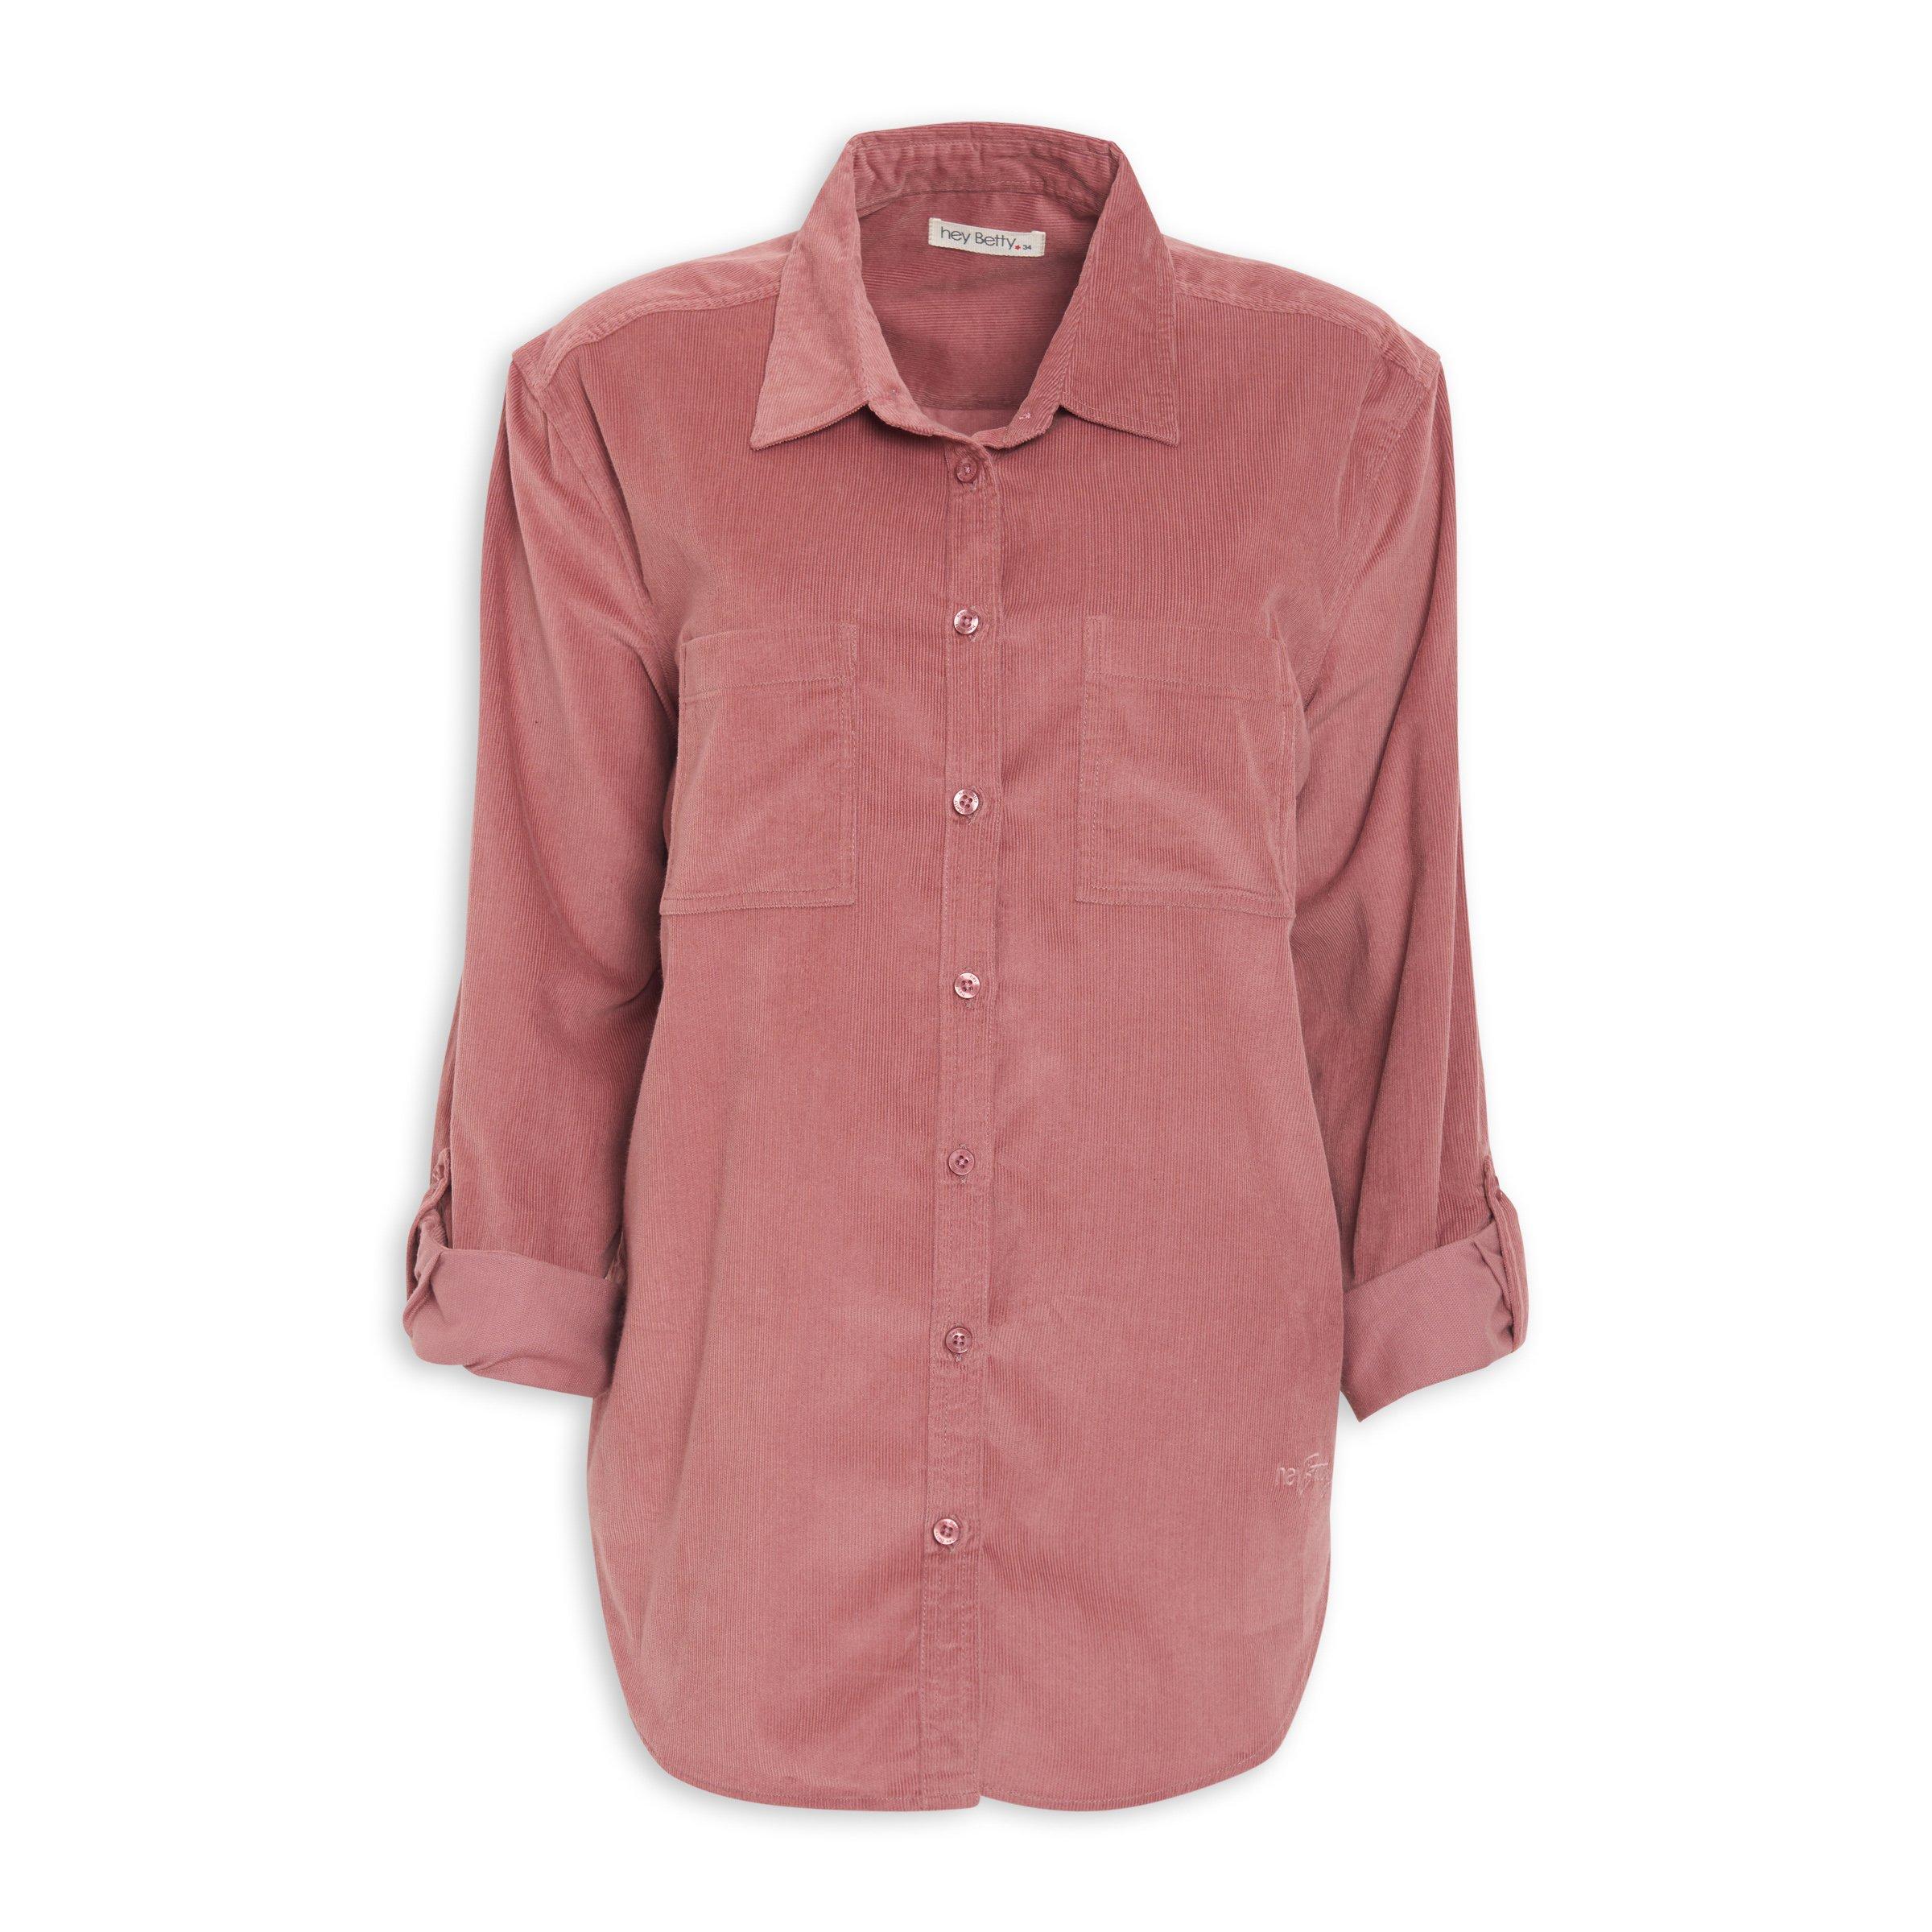 Buy Hey Betty Pink Relaxed Shirt Online | Truworths